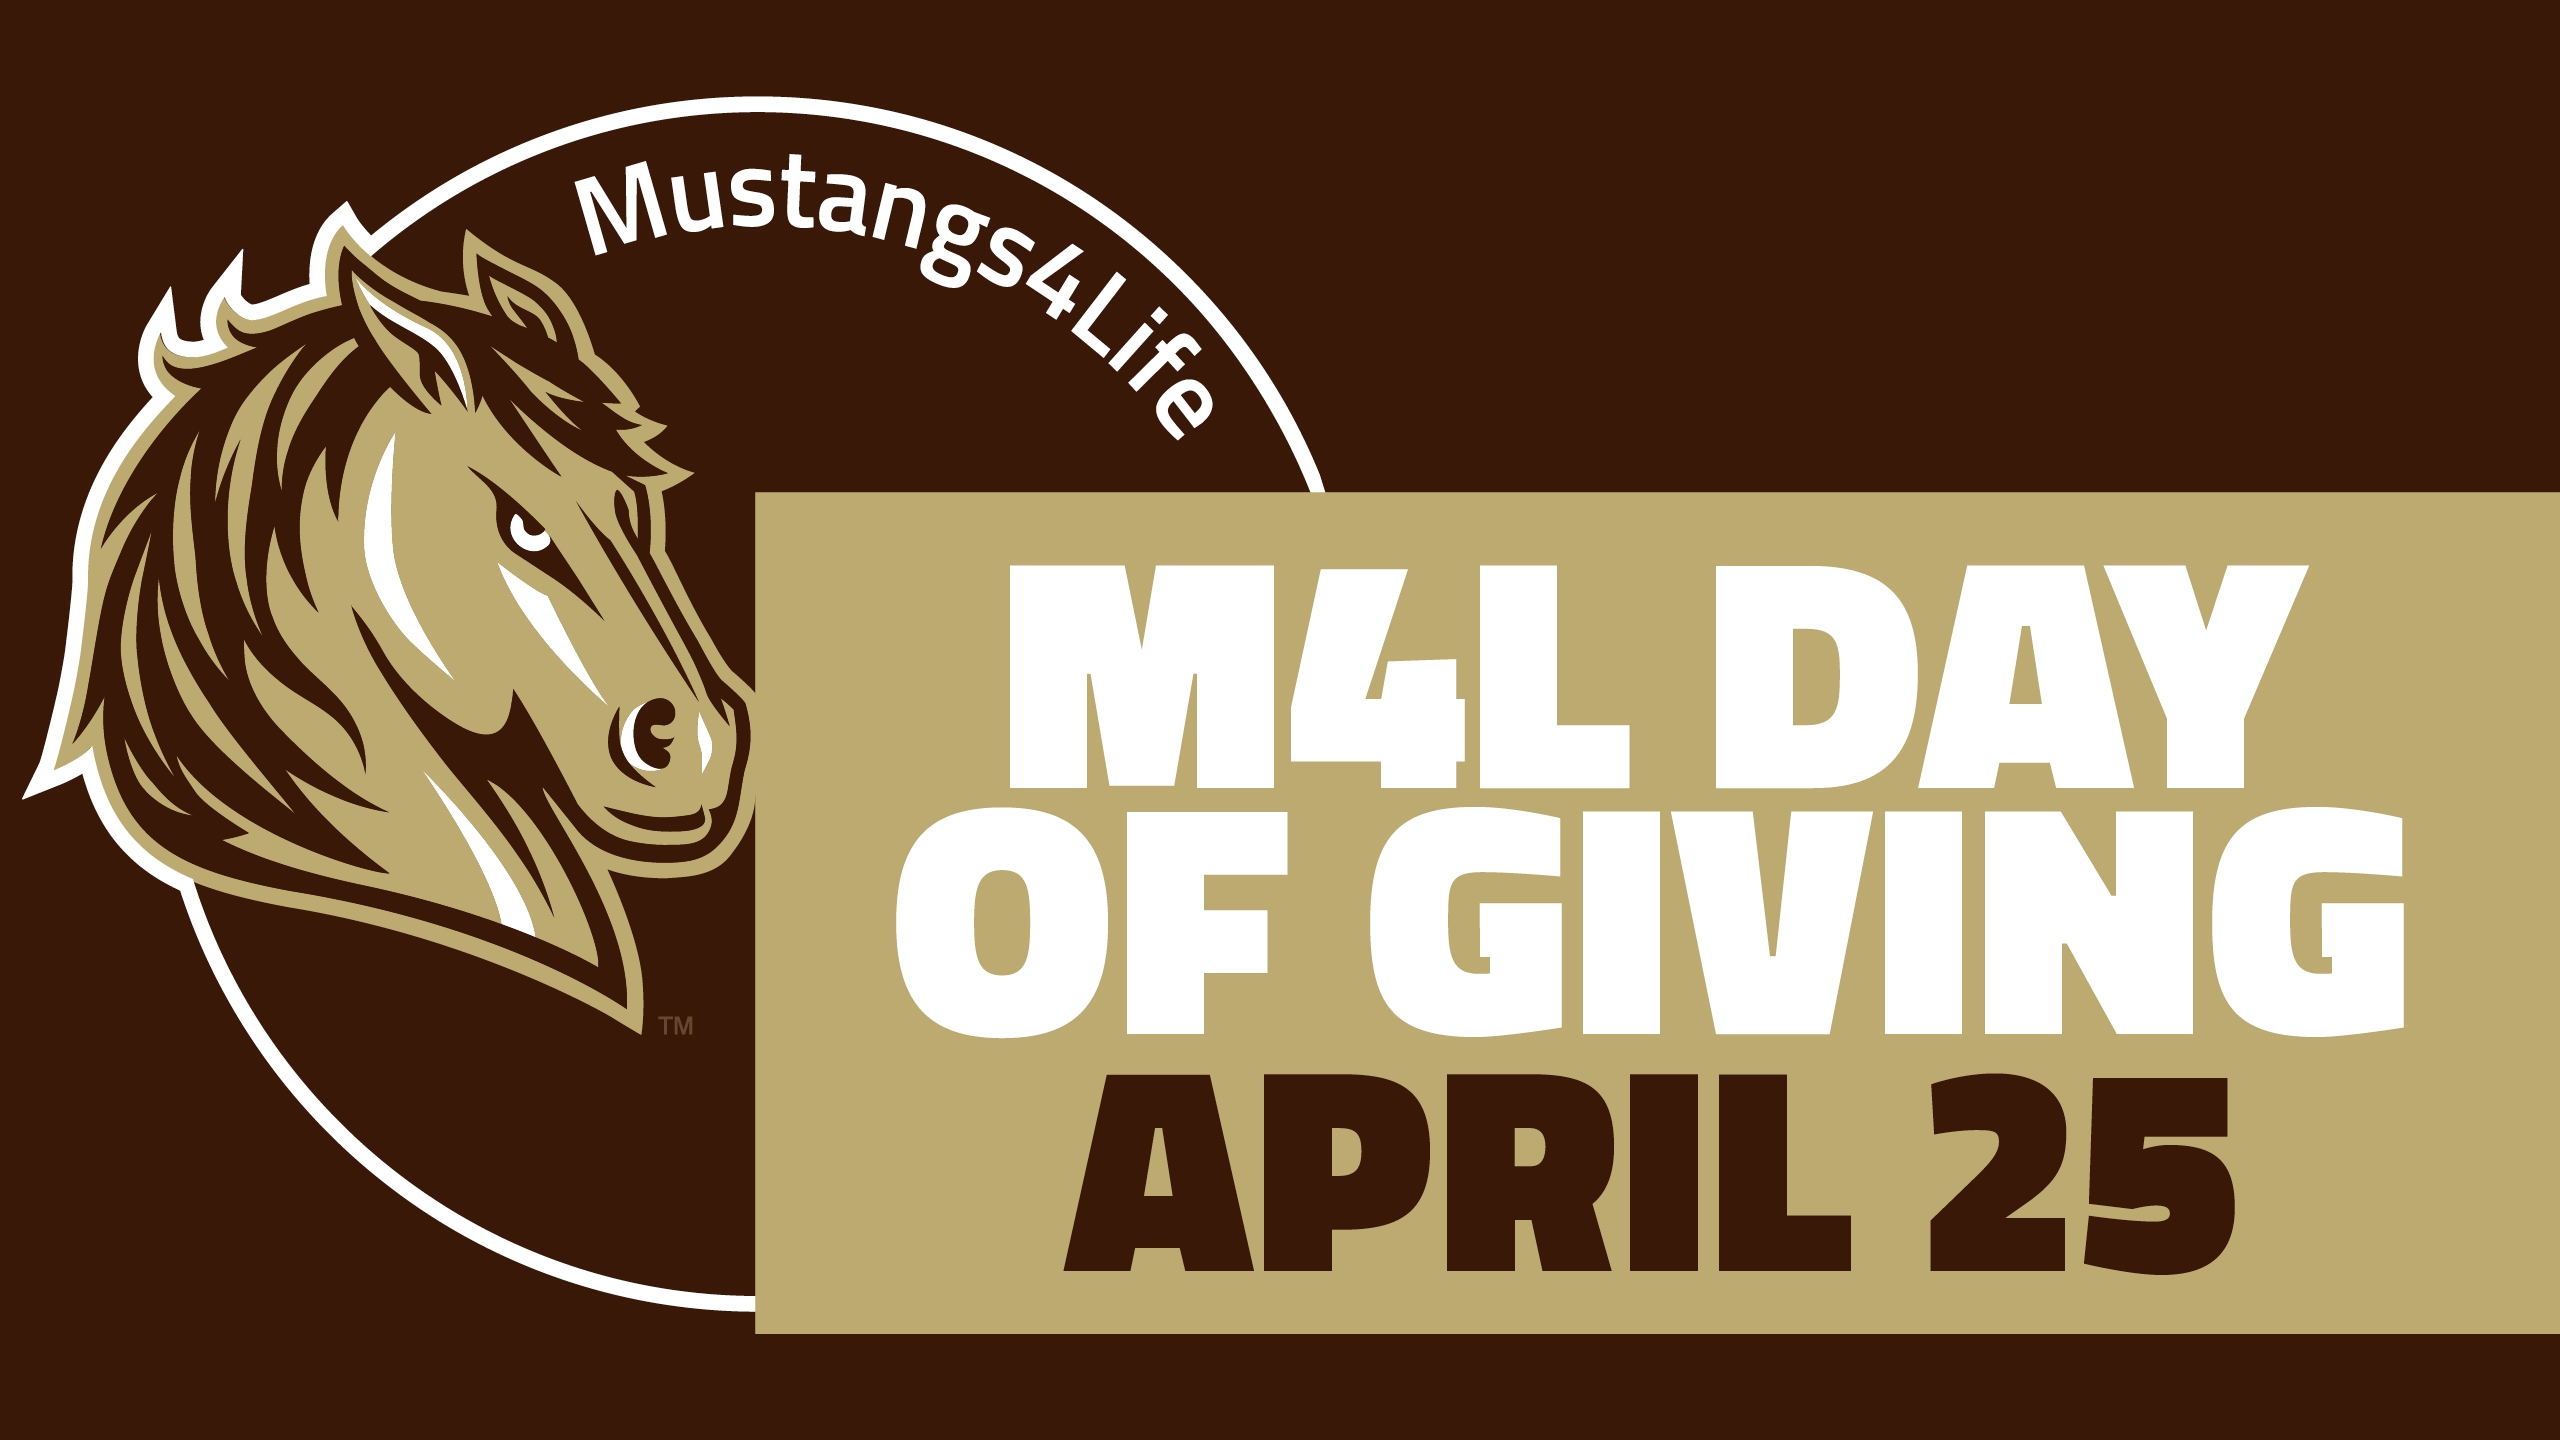 3rd Annual M4L Day of Giving is April 25 Featured Image